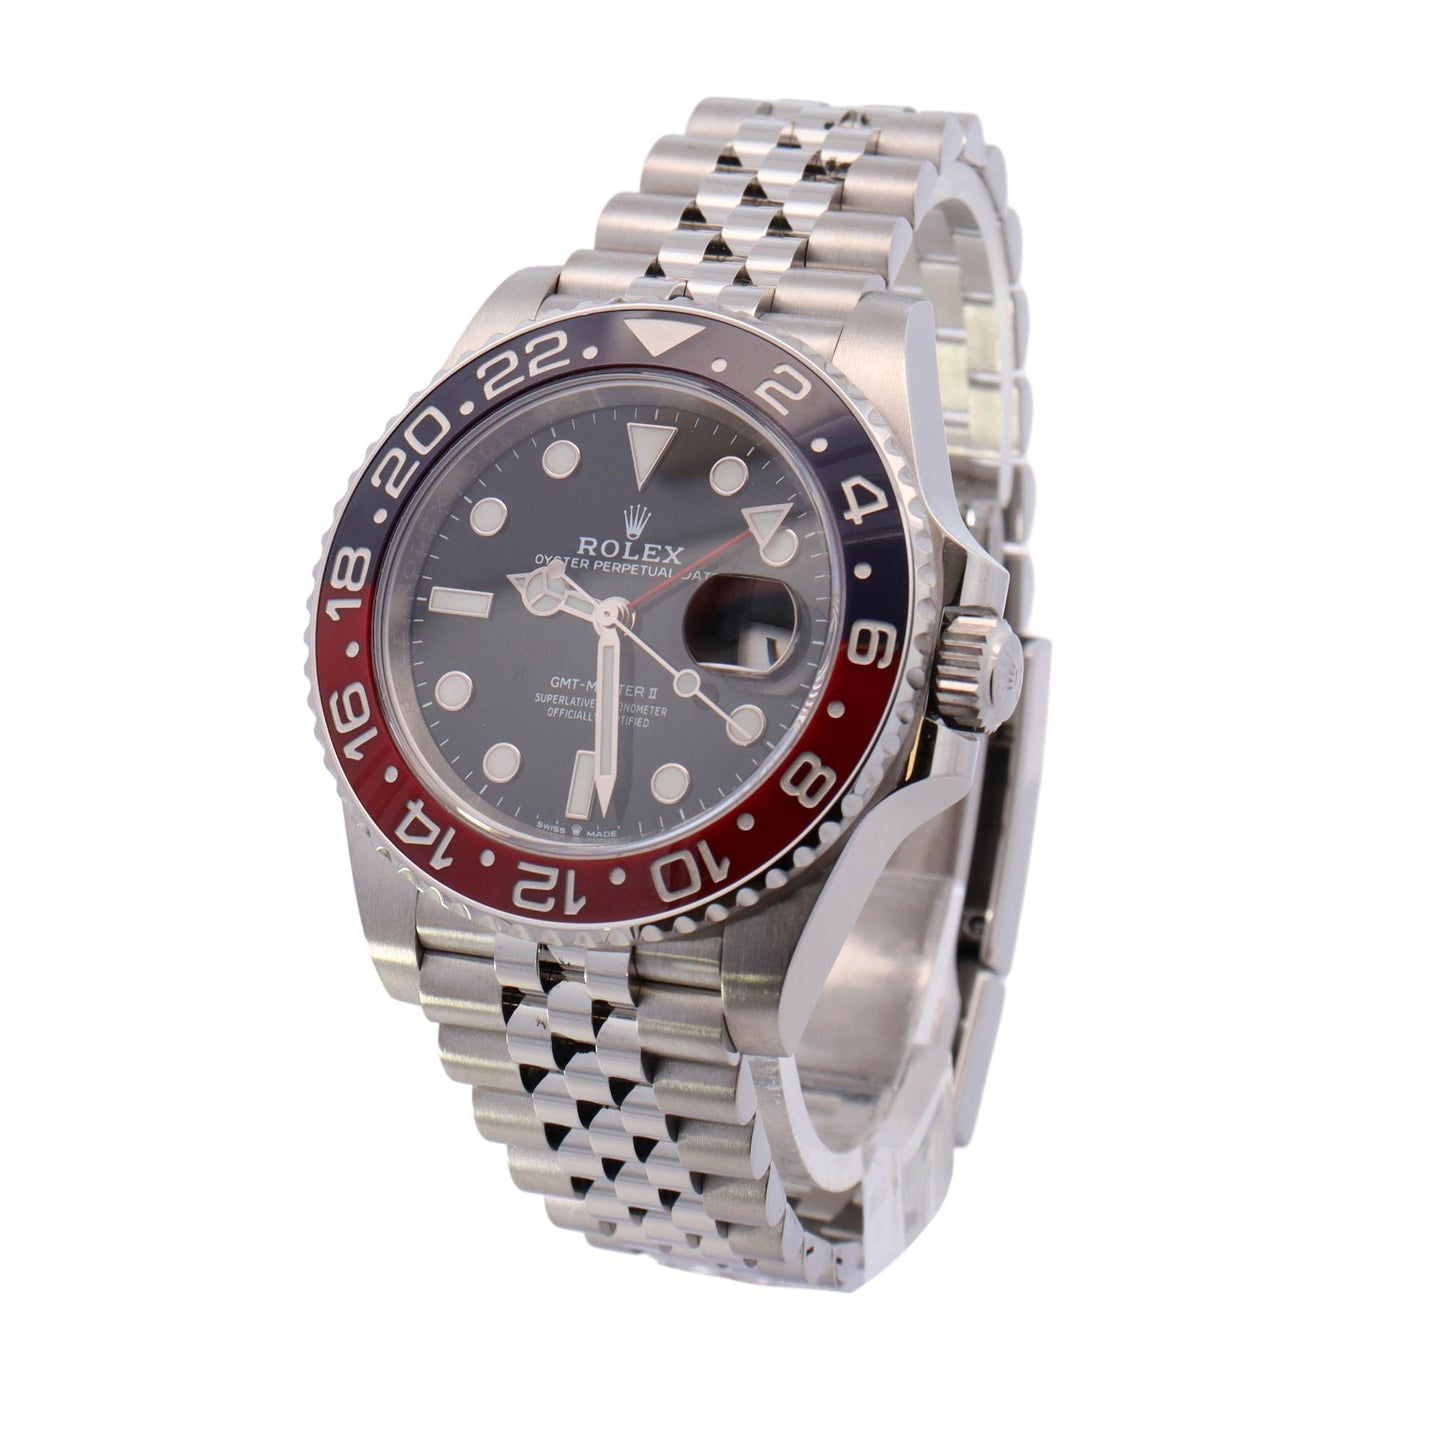 Rolex GMT Master II "Pepsi" 40mm Stainless Steel Black Dot Dial Watch Reference #: 126710BLRO